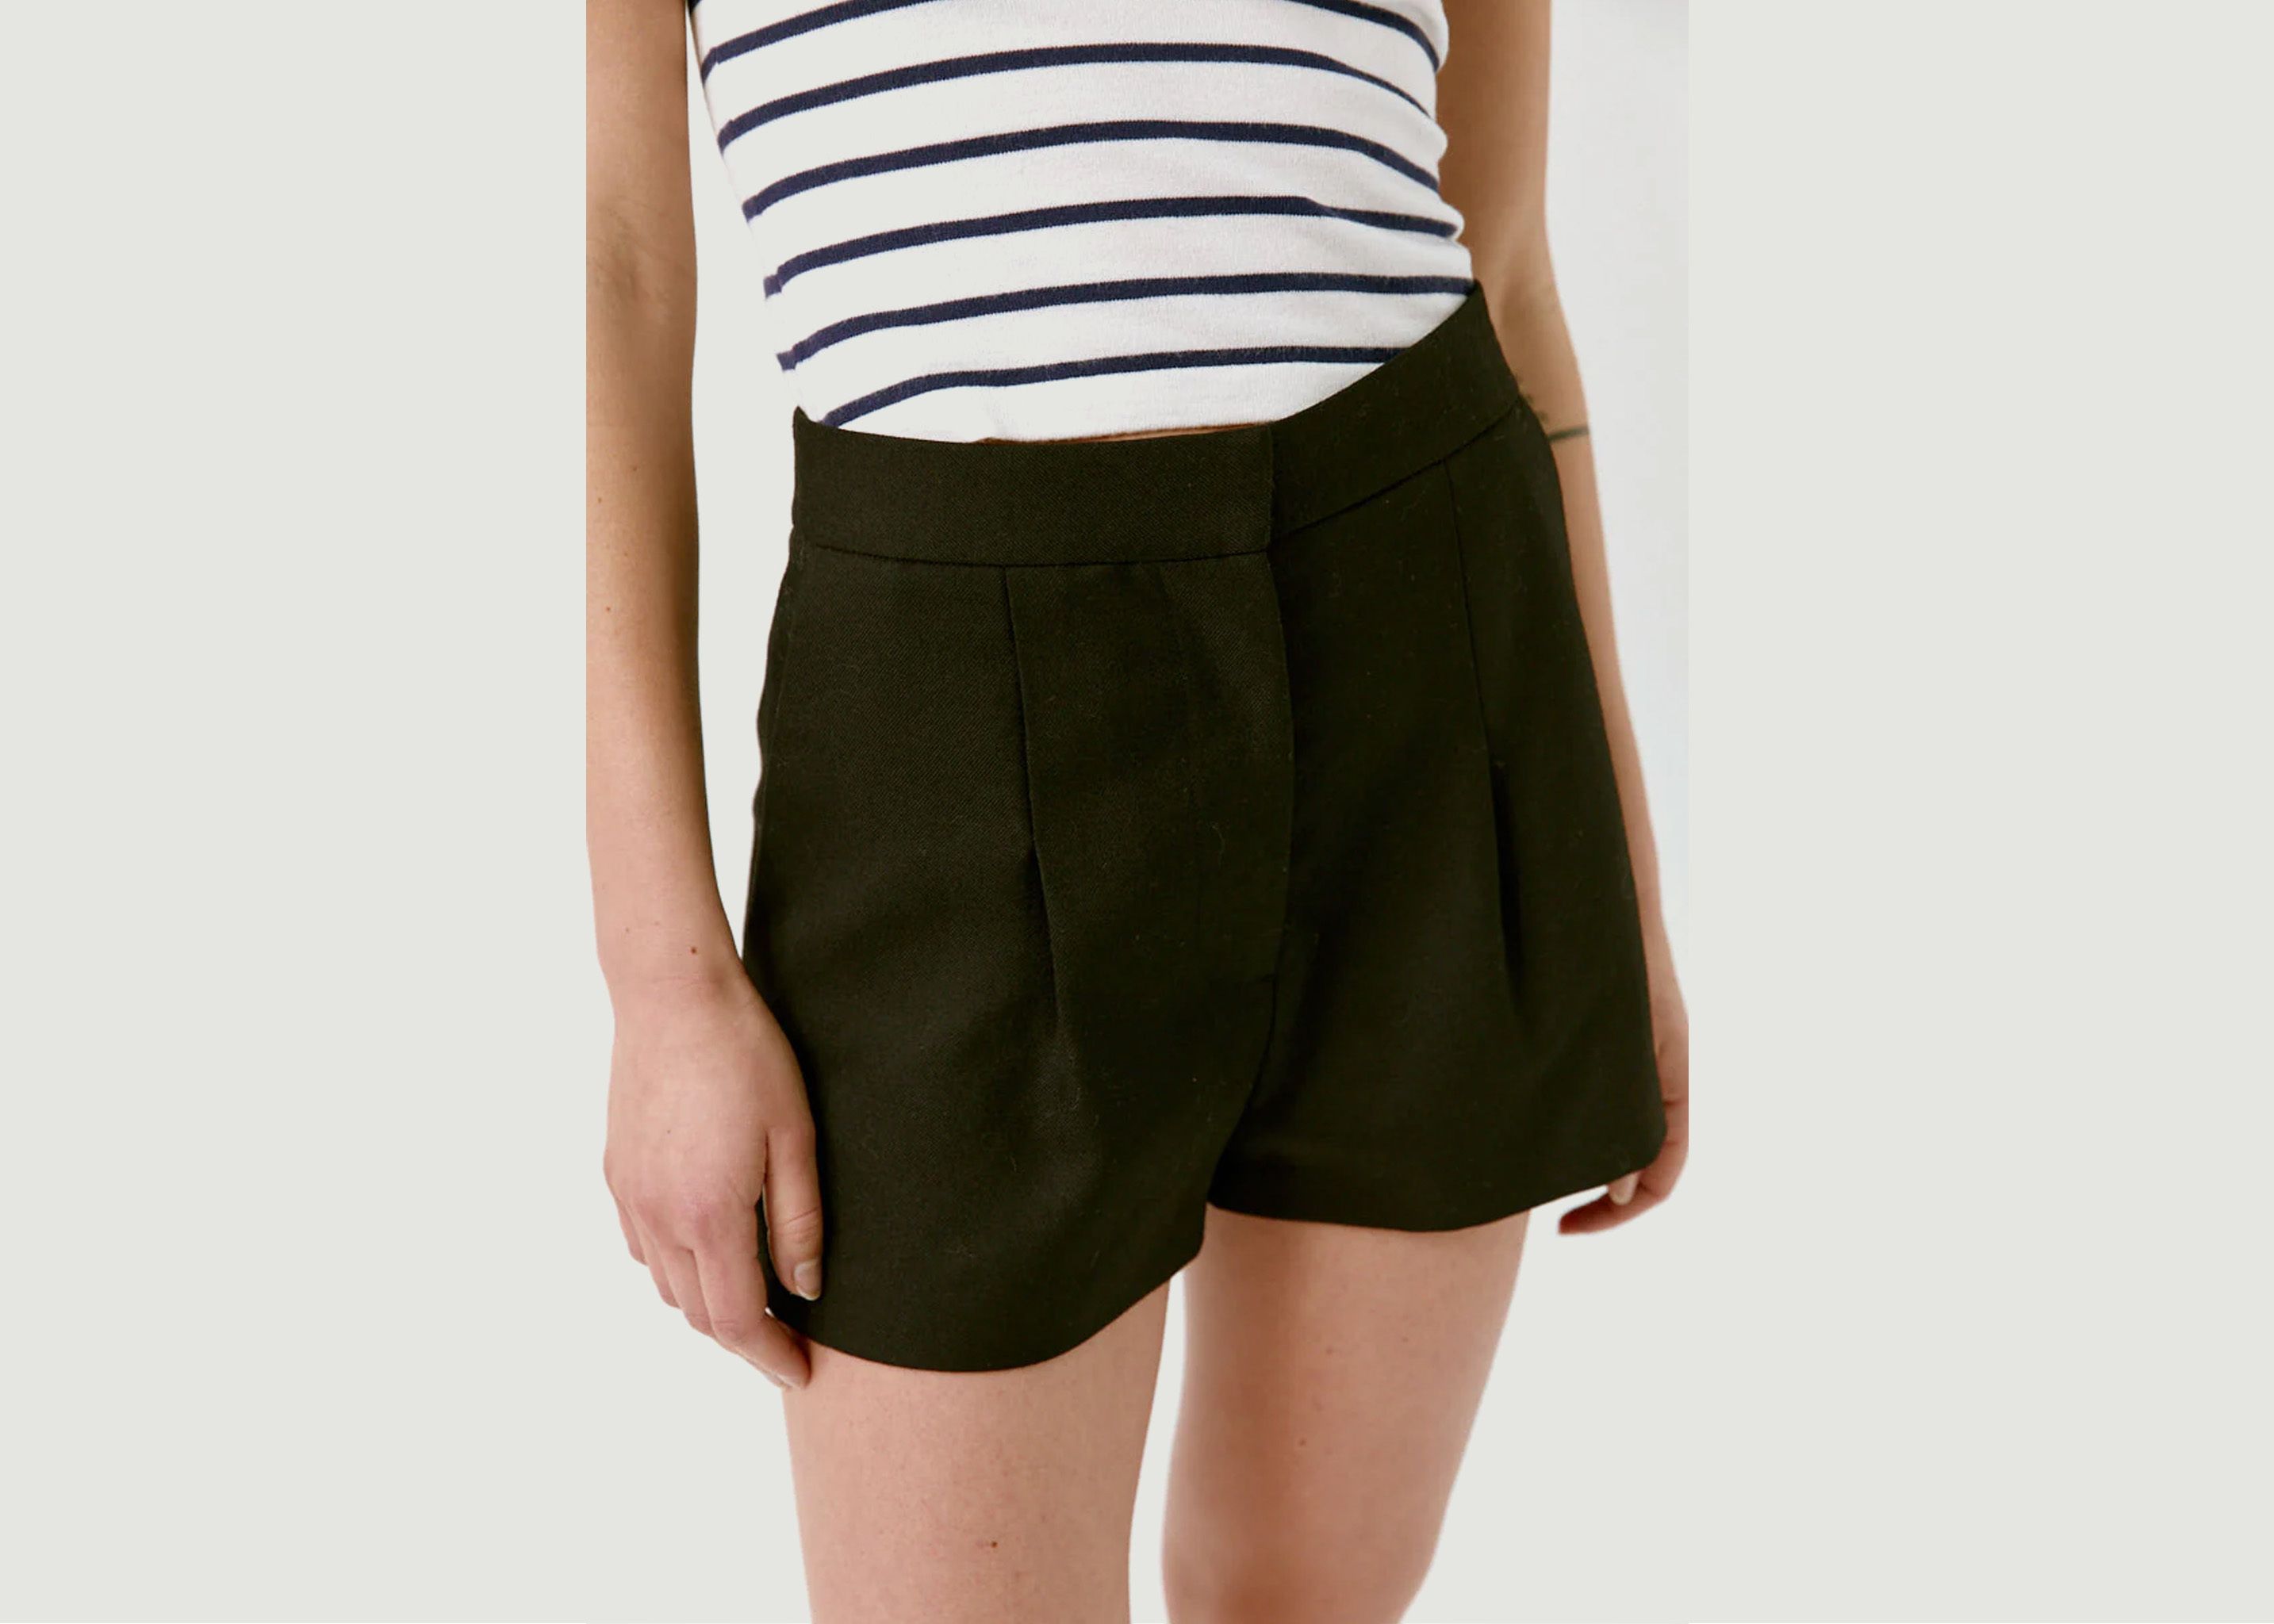 Aricie shorts - Musier